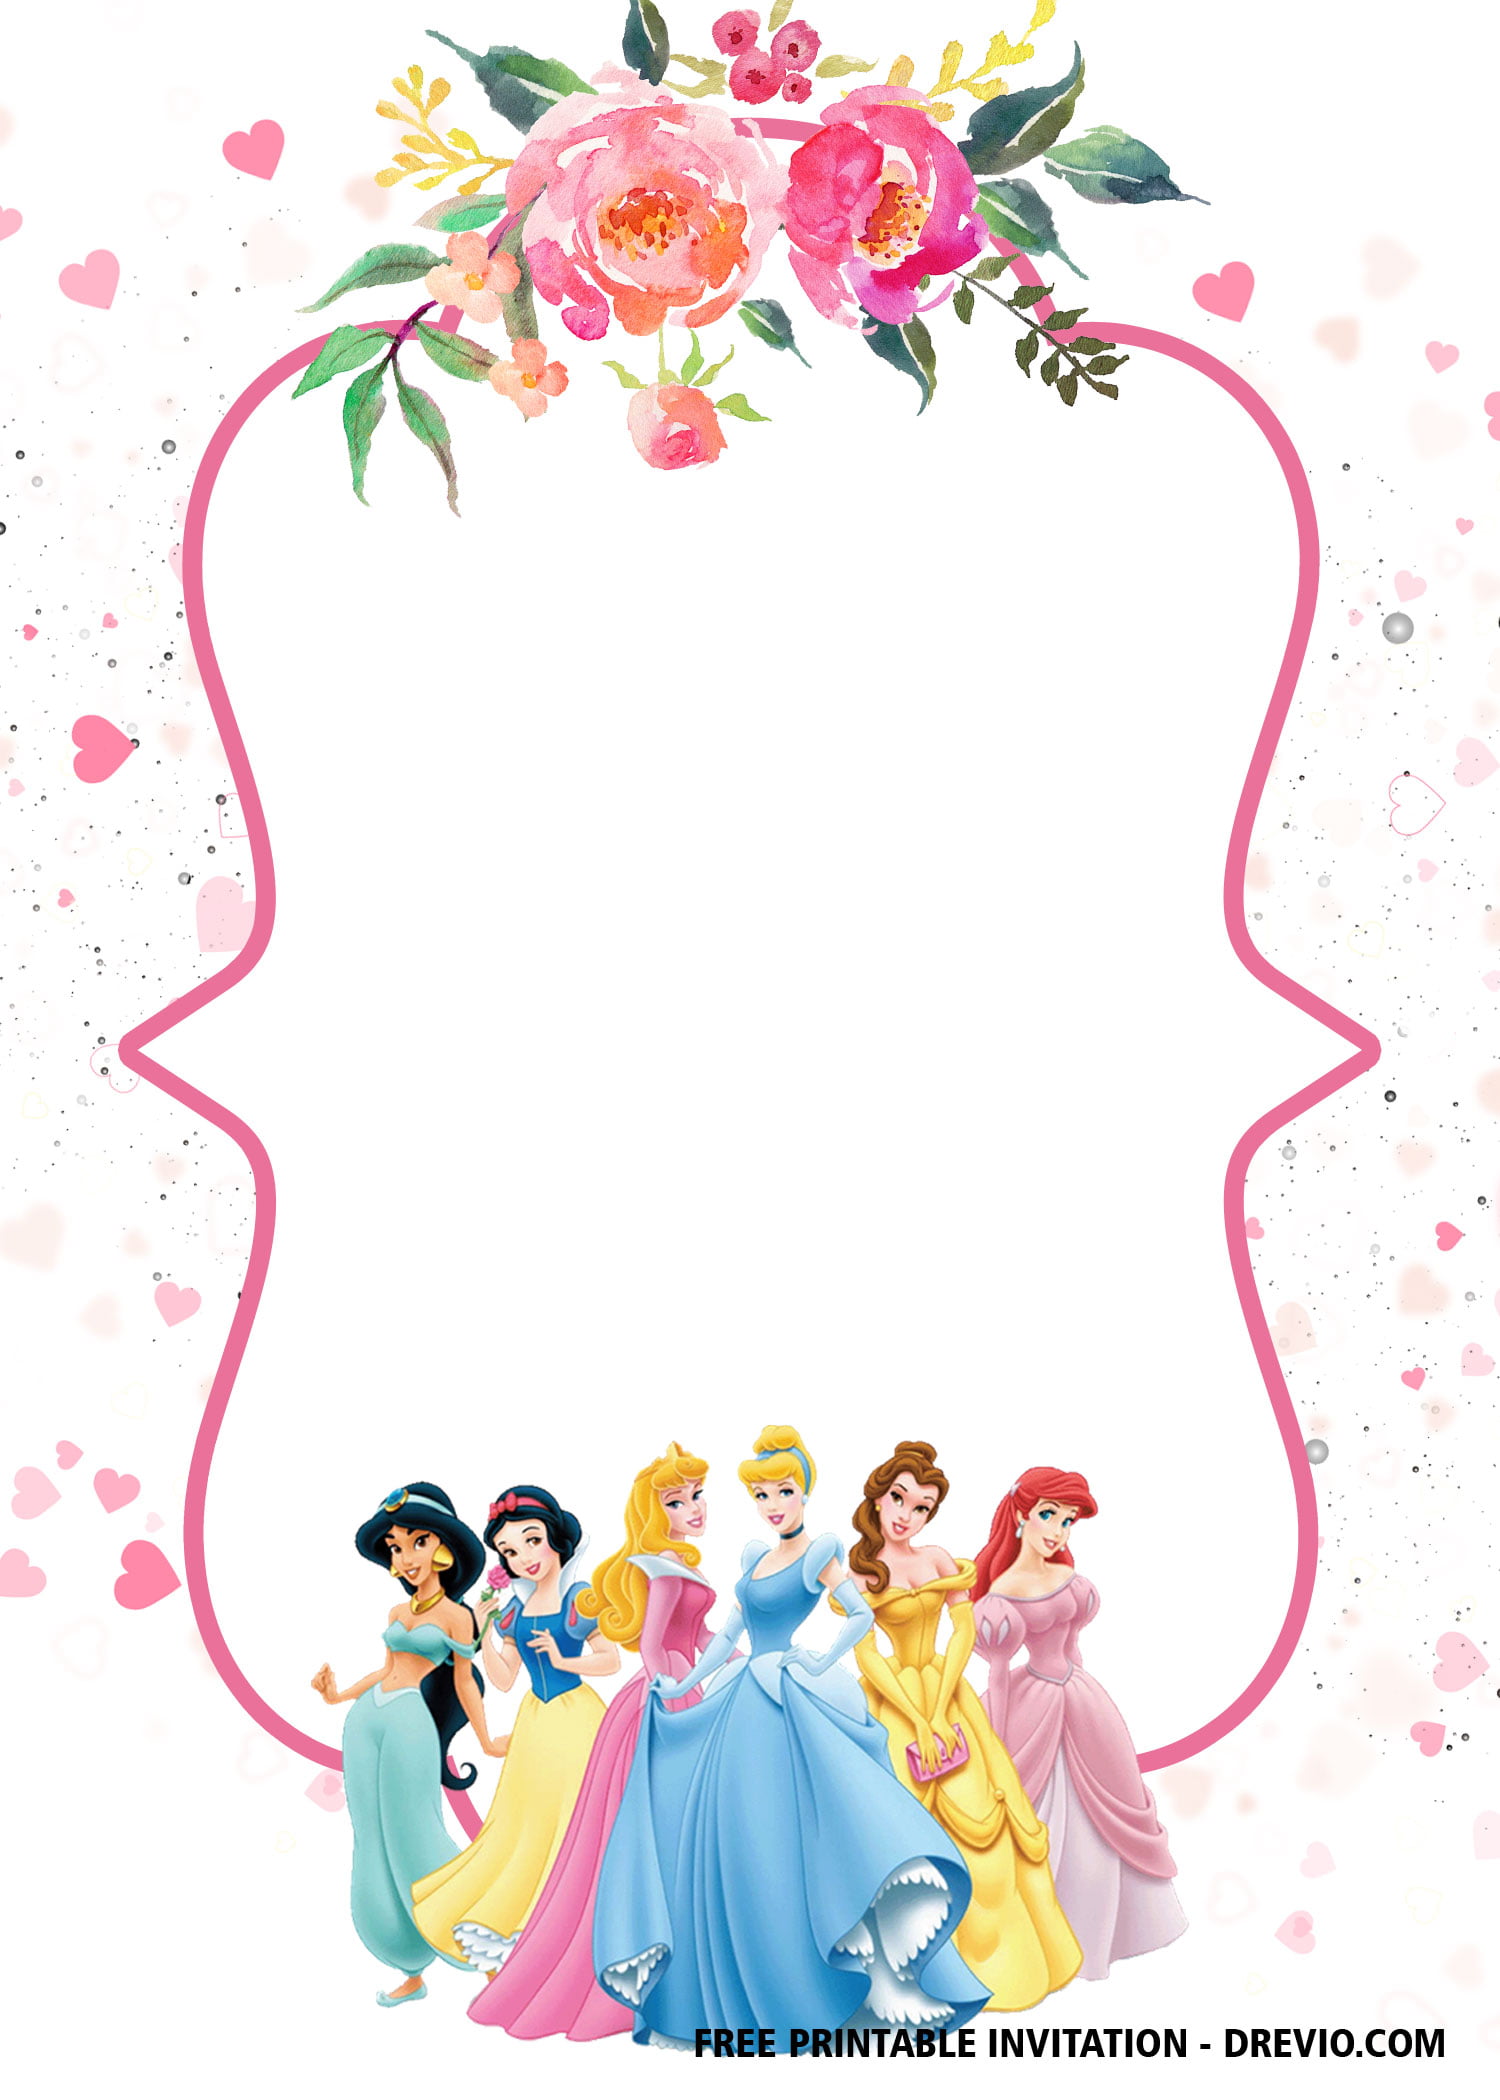 FREE Disney Princess Invitation Template for Your Little Girl #39 s